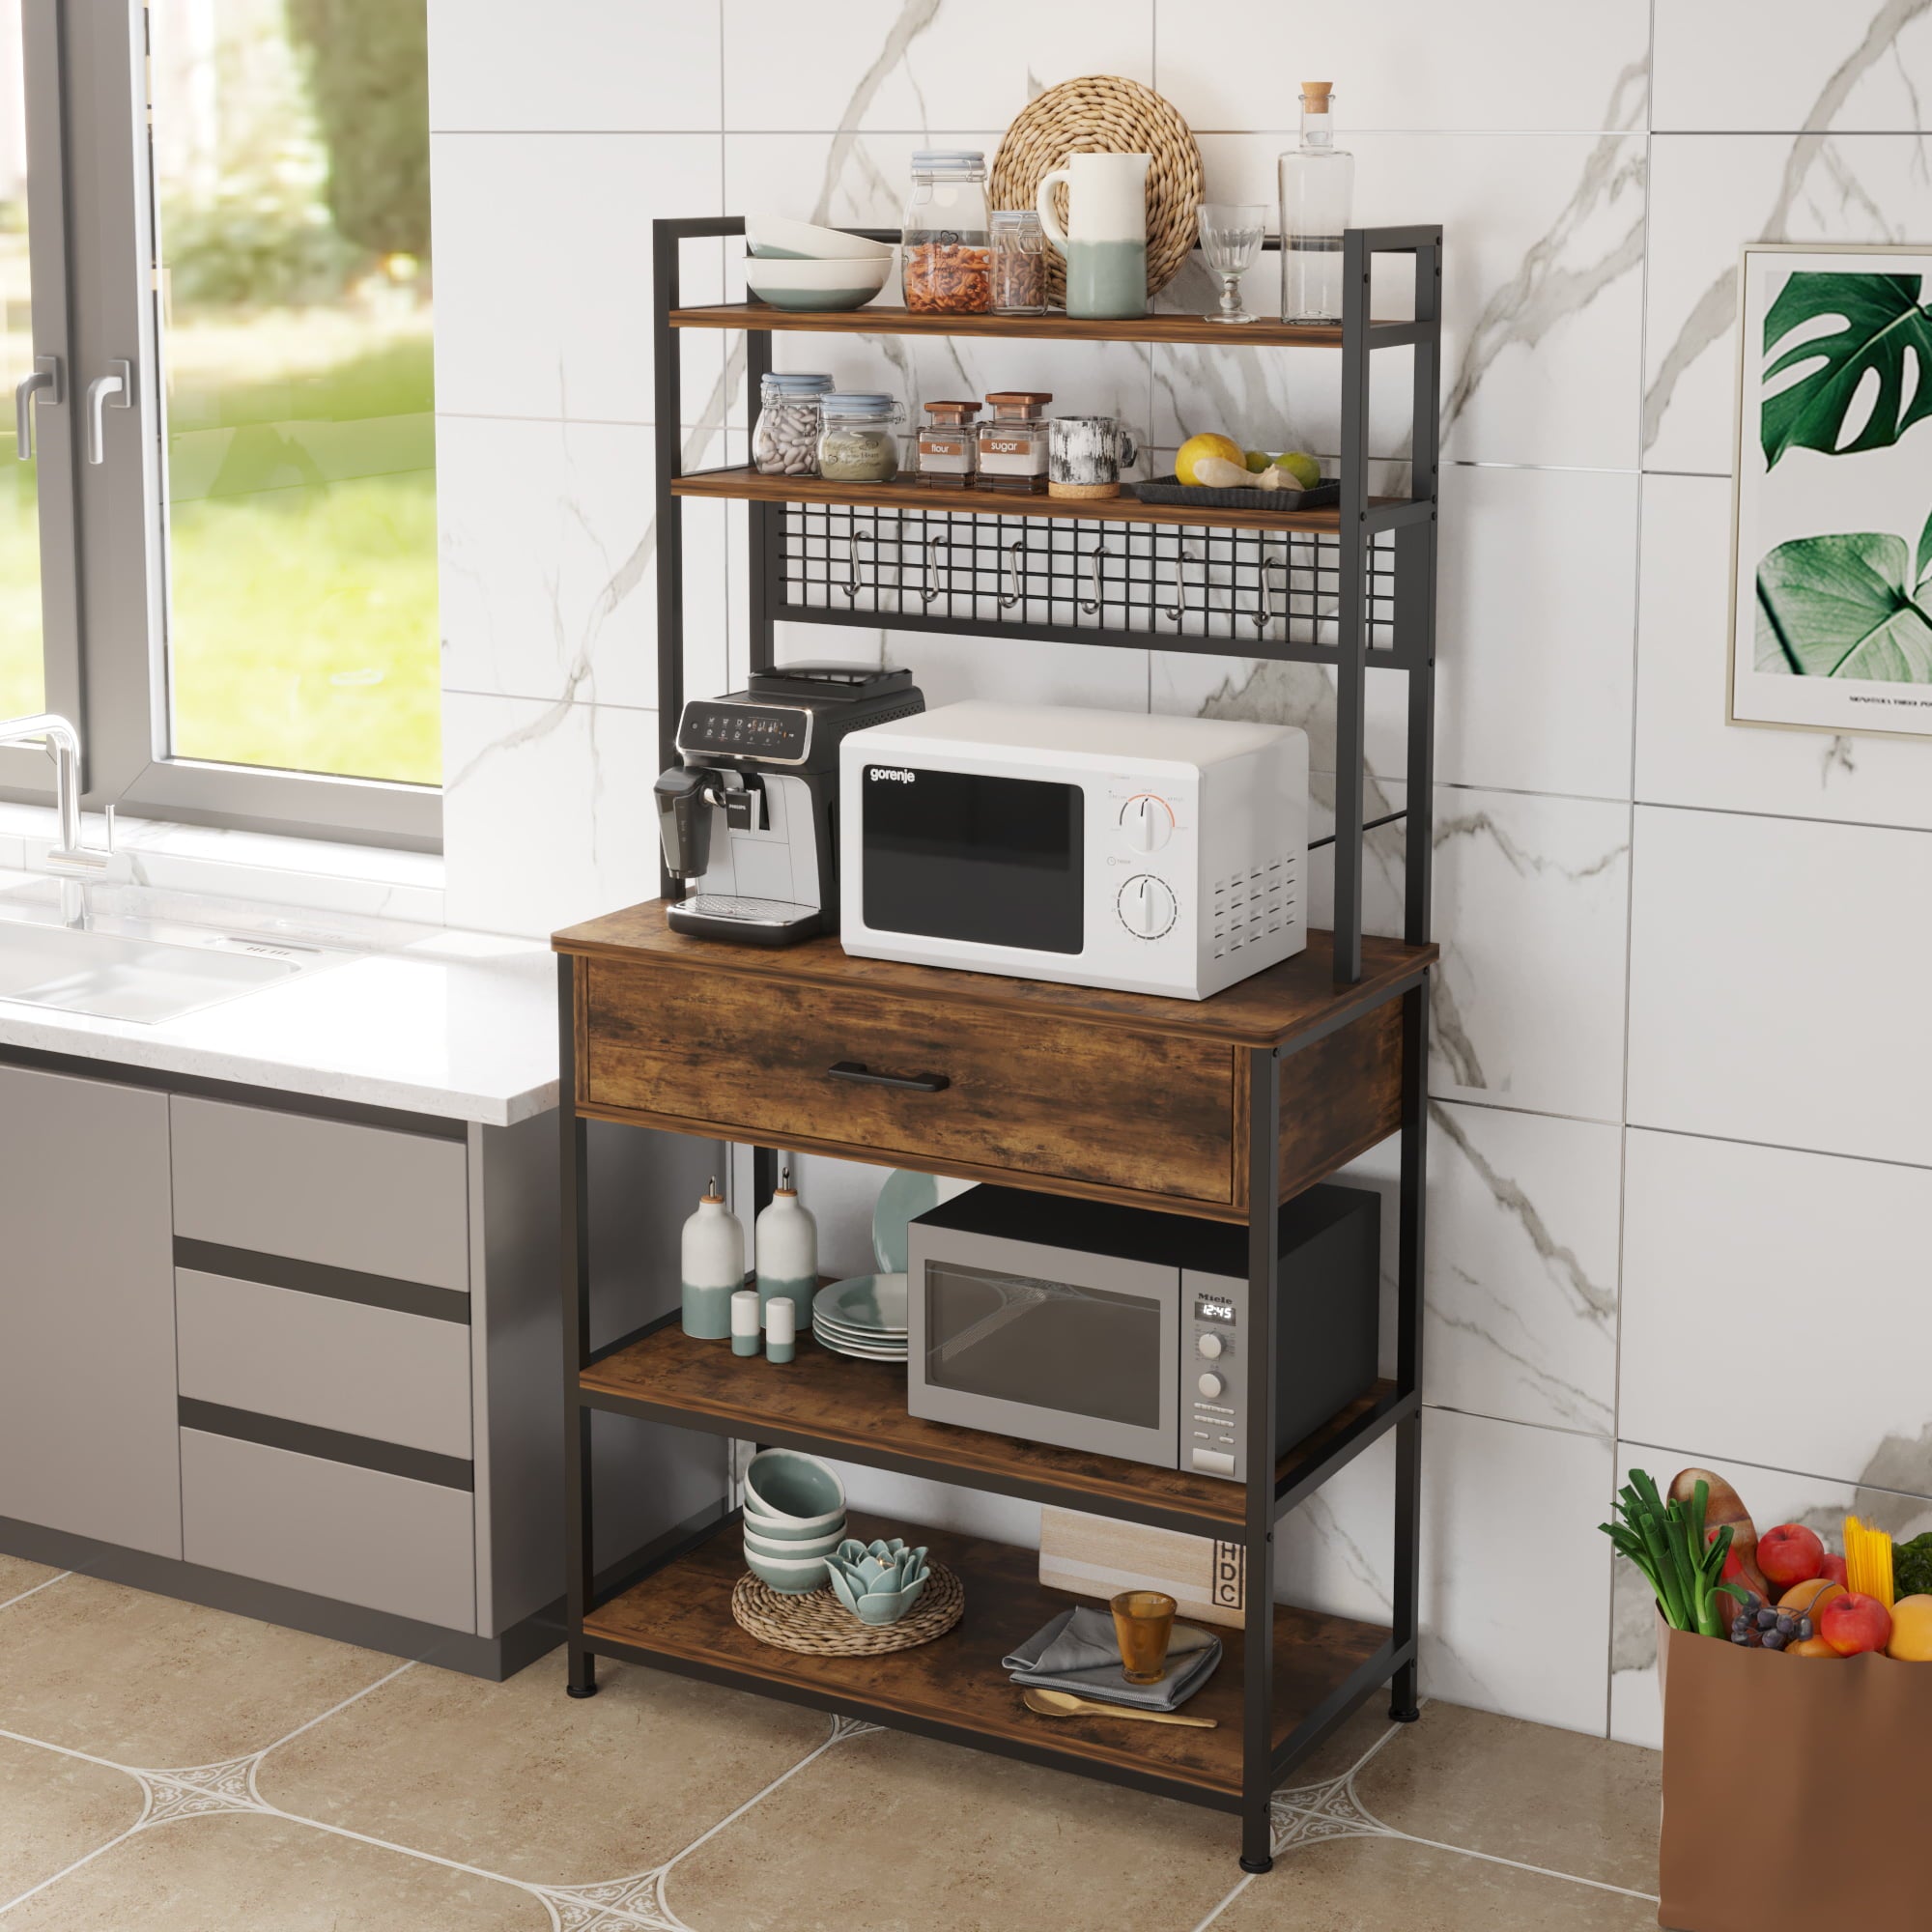 Zimtown 5 Tiers Bakers Rack Industrial Kitchen Island with Storage Drawer， Microwave Oven Cart Coffee Bar Stand W/ Shelf and 10 S-Hooks， Rustic Brown Finish